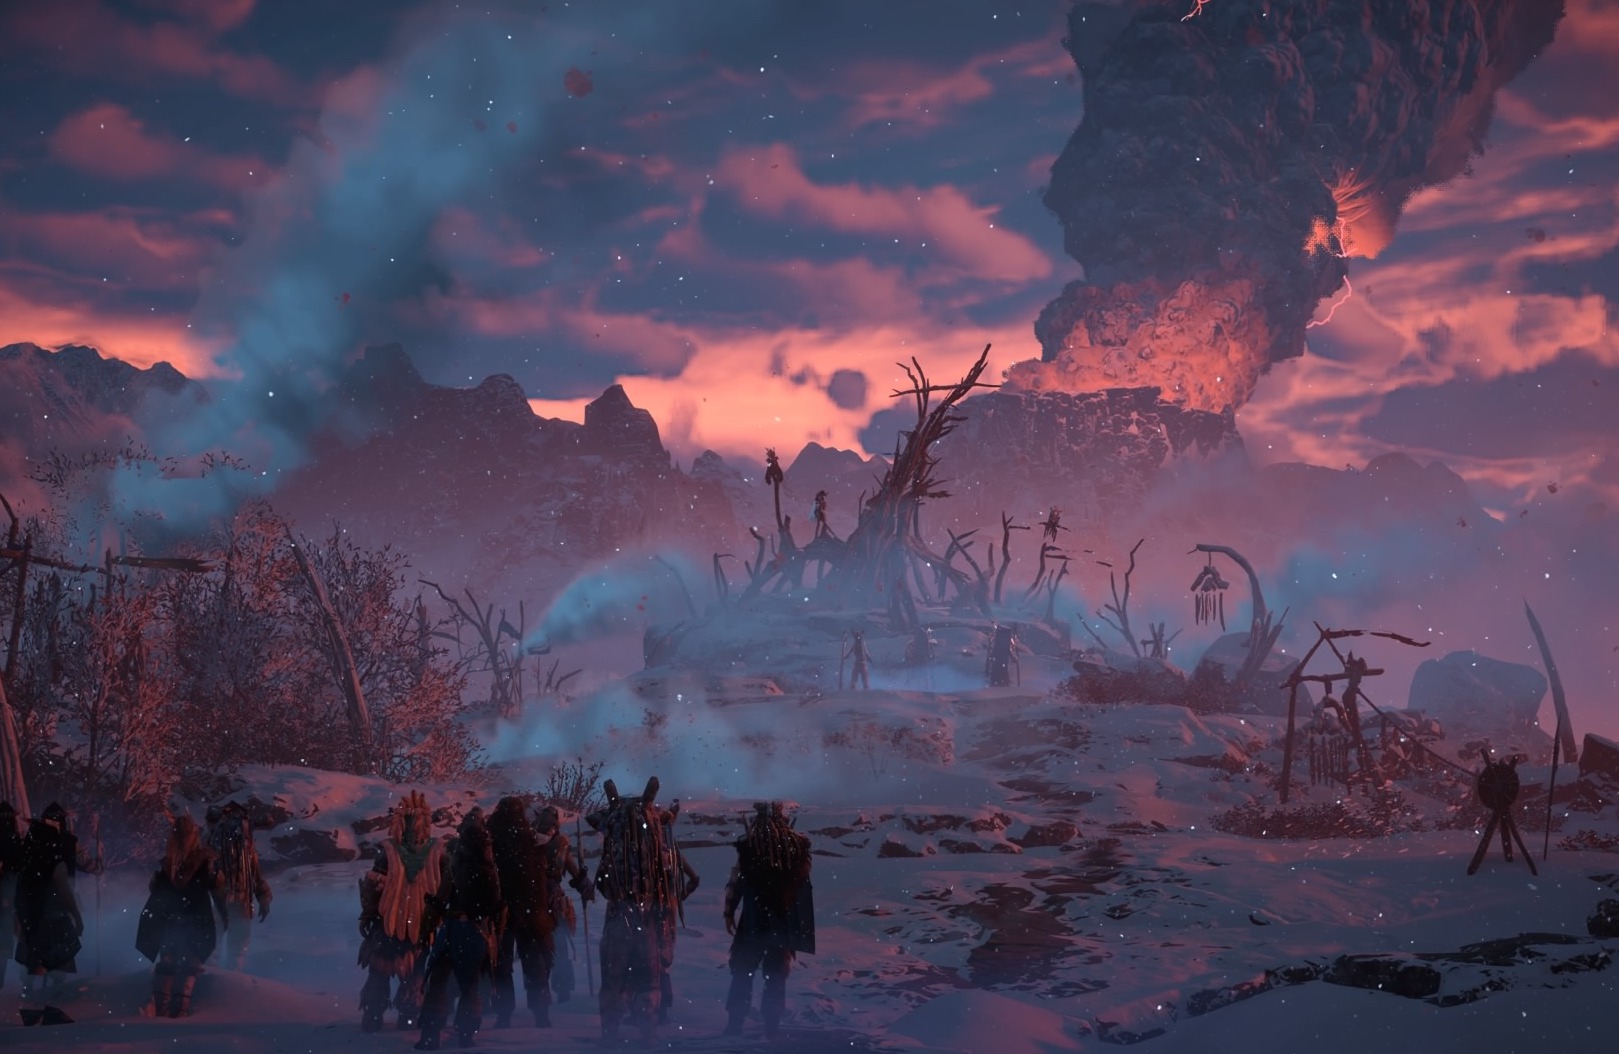 Horizon: Will You Need to Play Frozen Wilds Before Forbidden West?